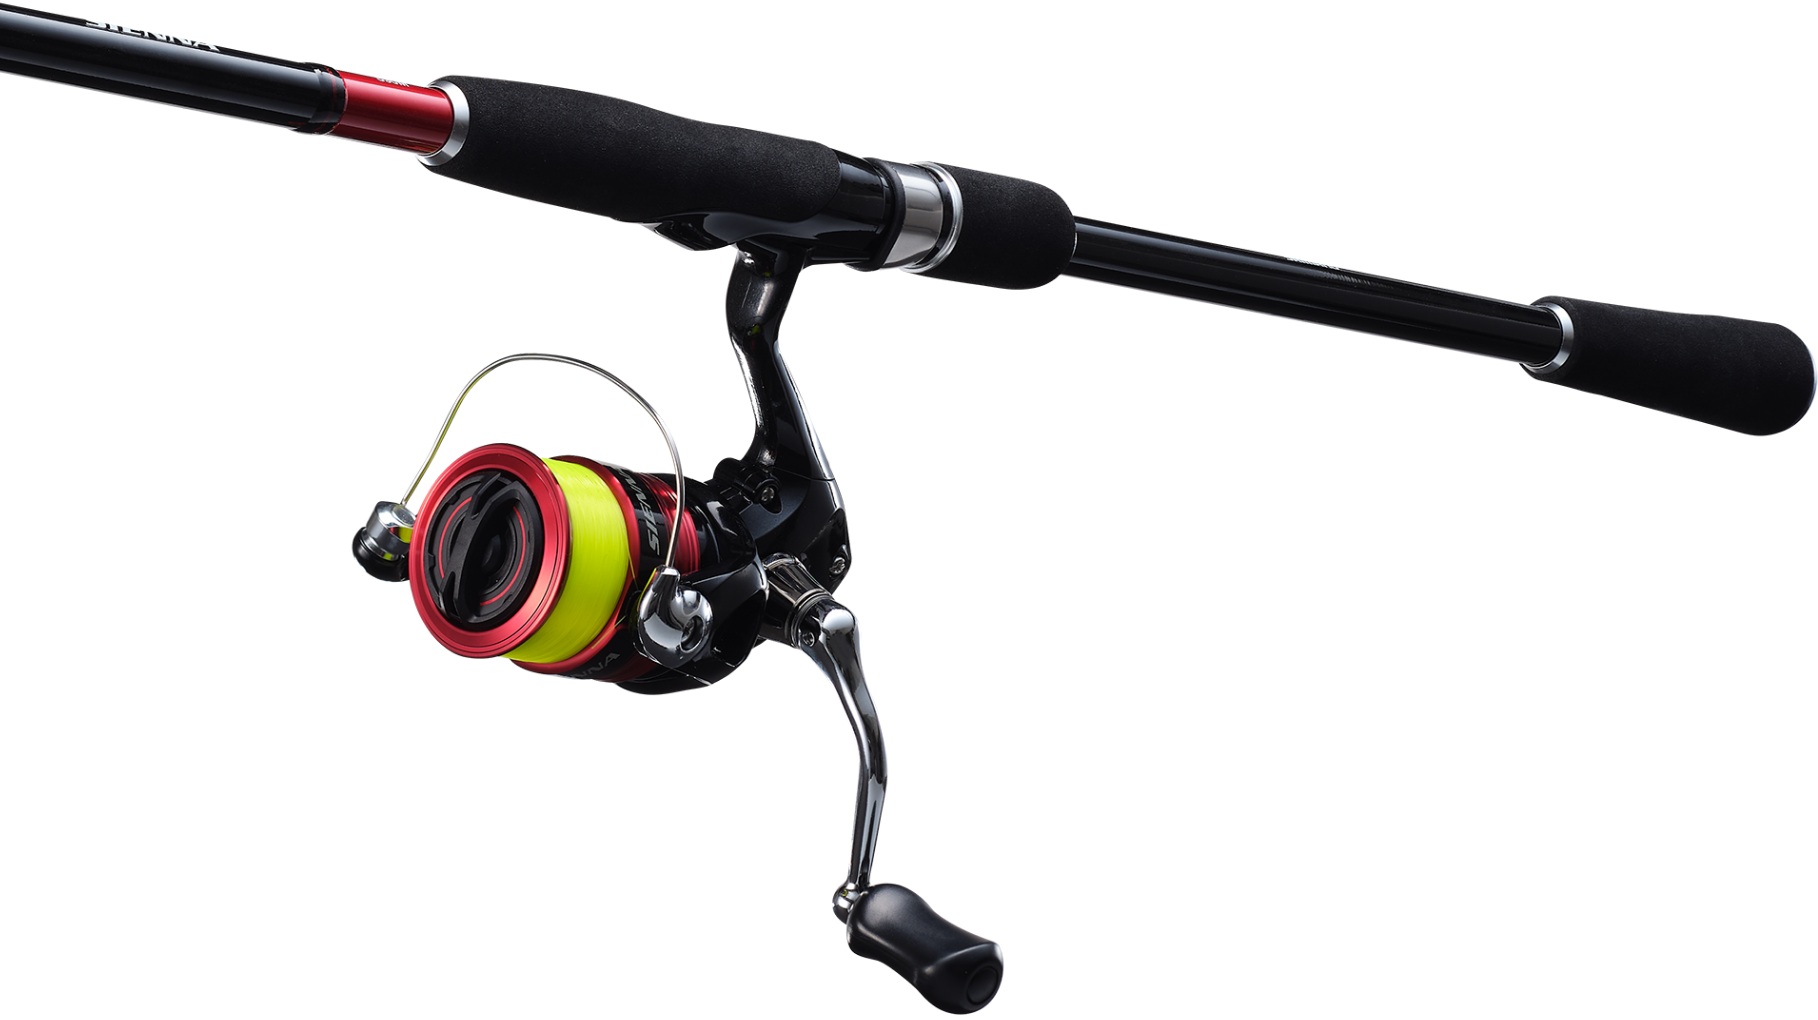 Shimano Sienna 2500 fishing rod and reel how to service and repair